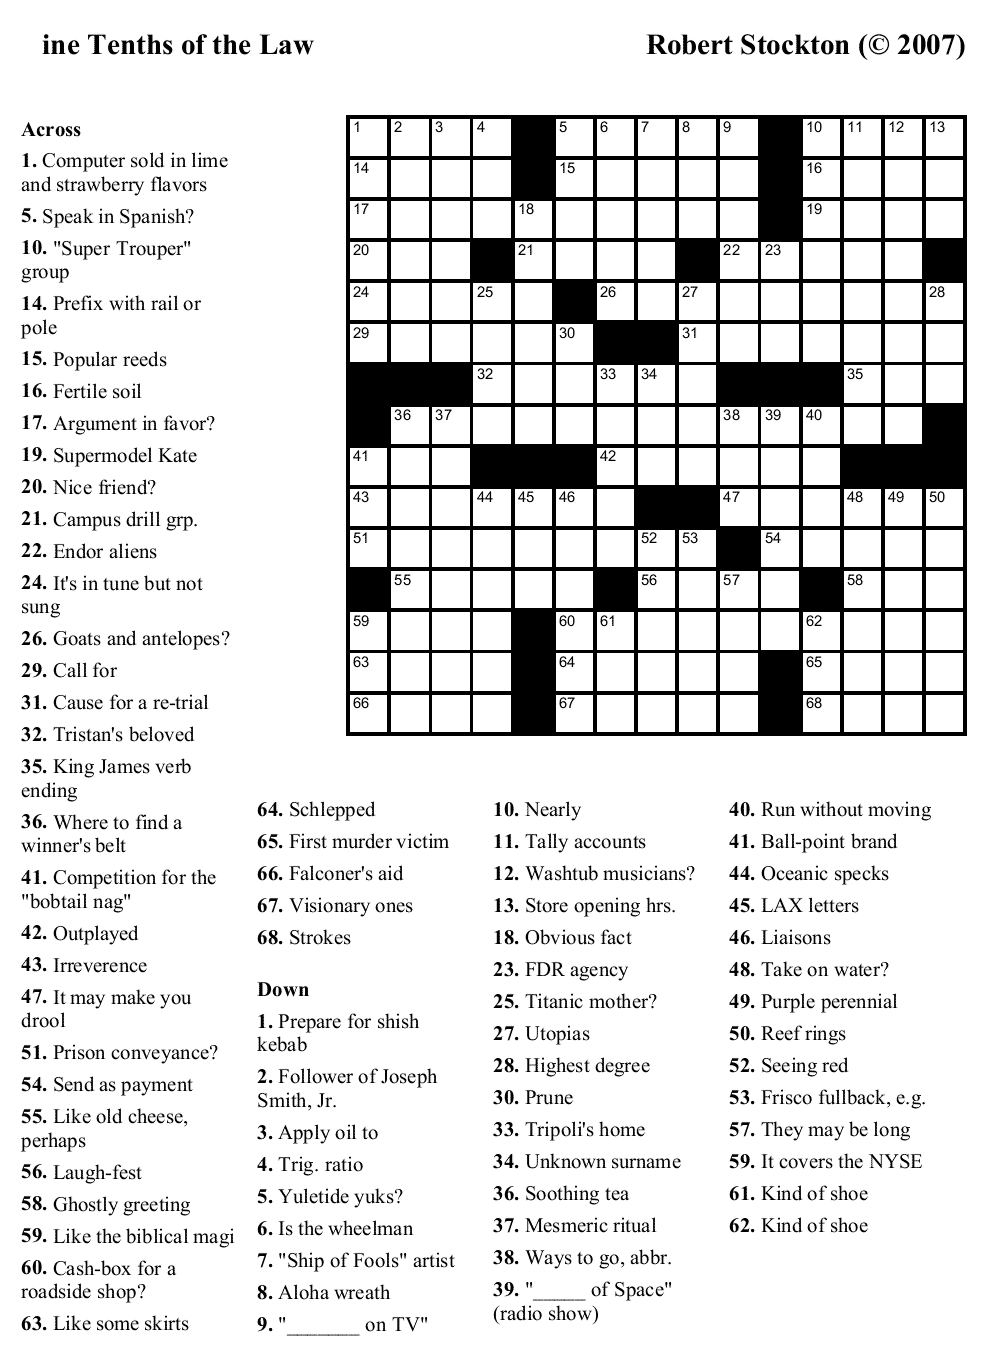 Crossword Puzzles Printable - Yahoo Image Search Results | Crossword - Printable Crossword Puzzles And Solutions